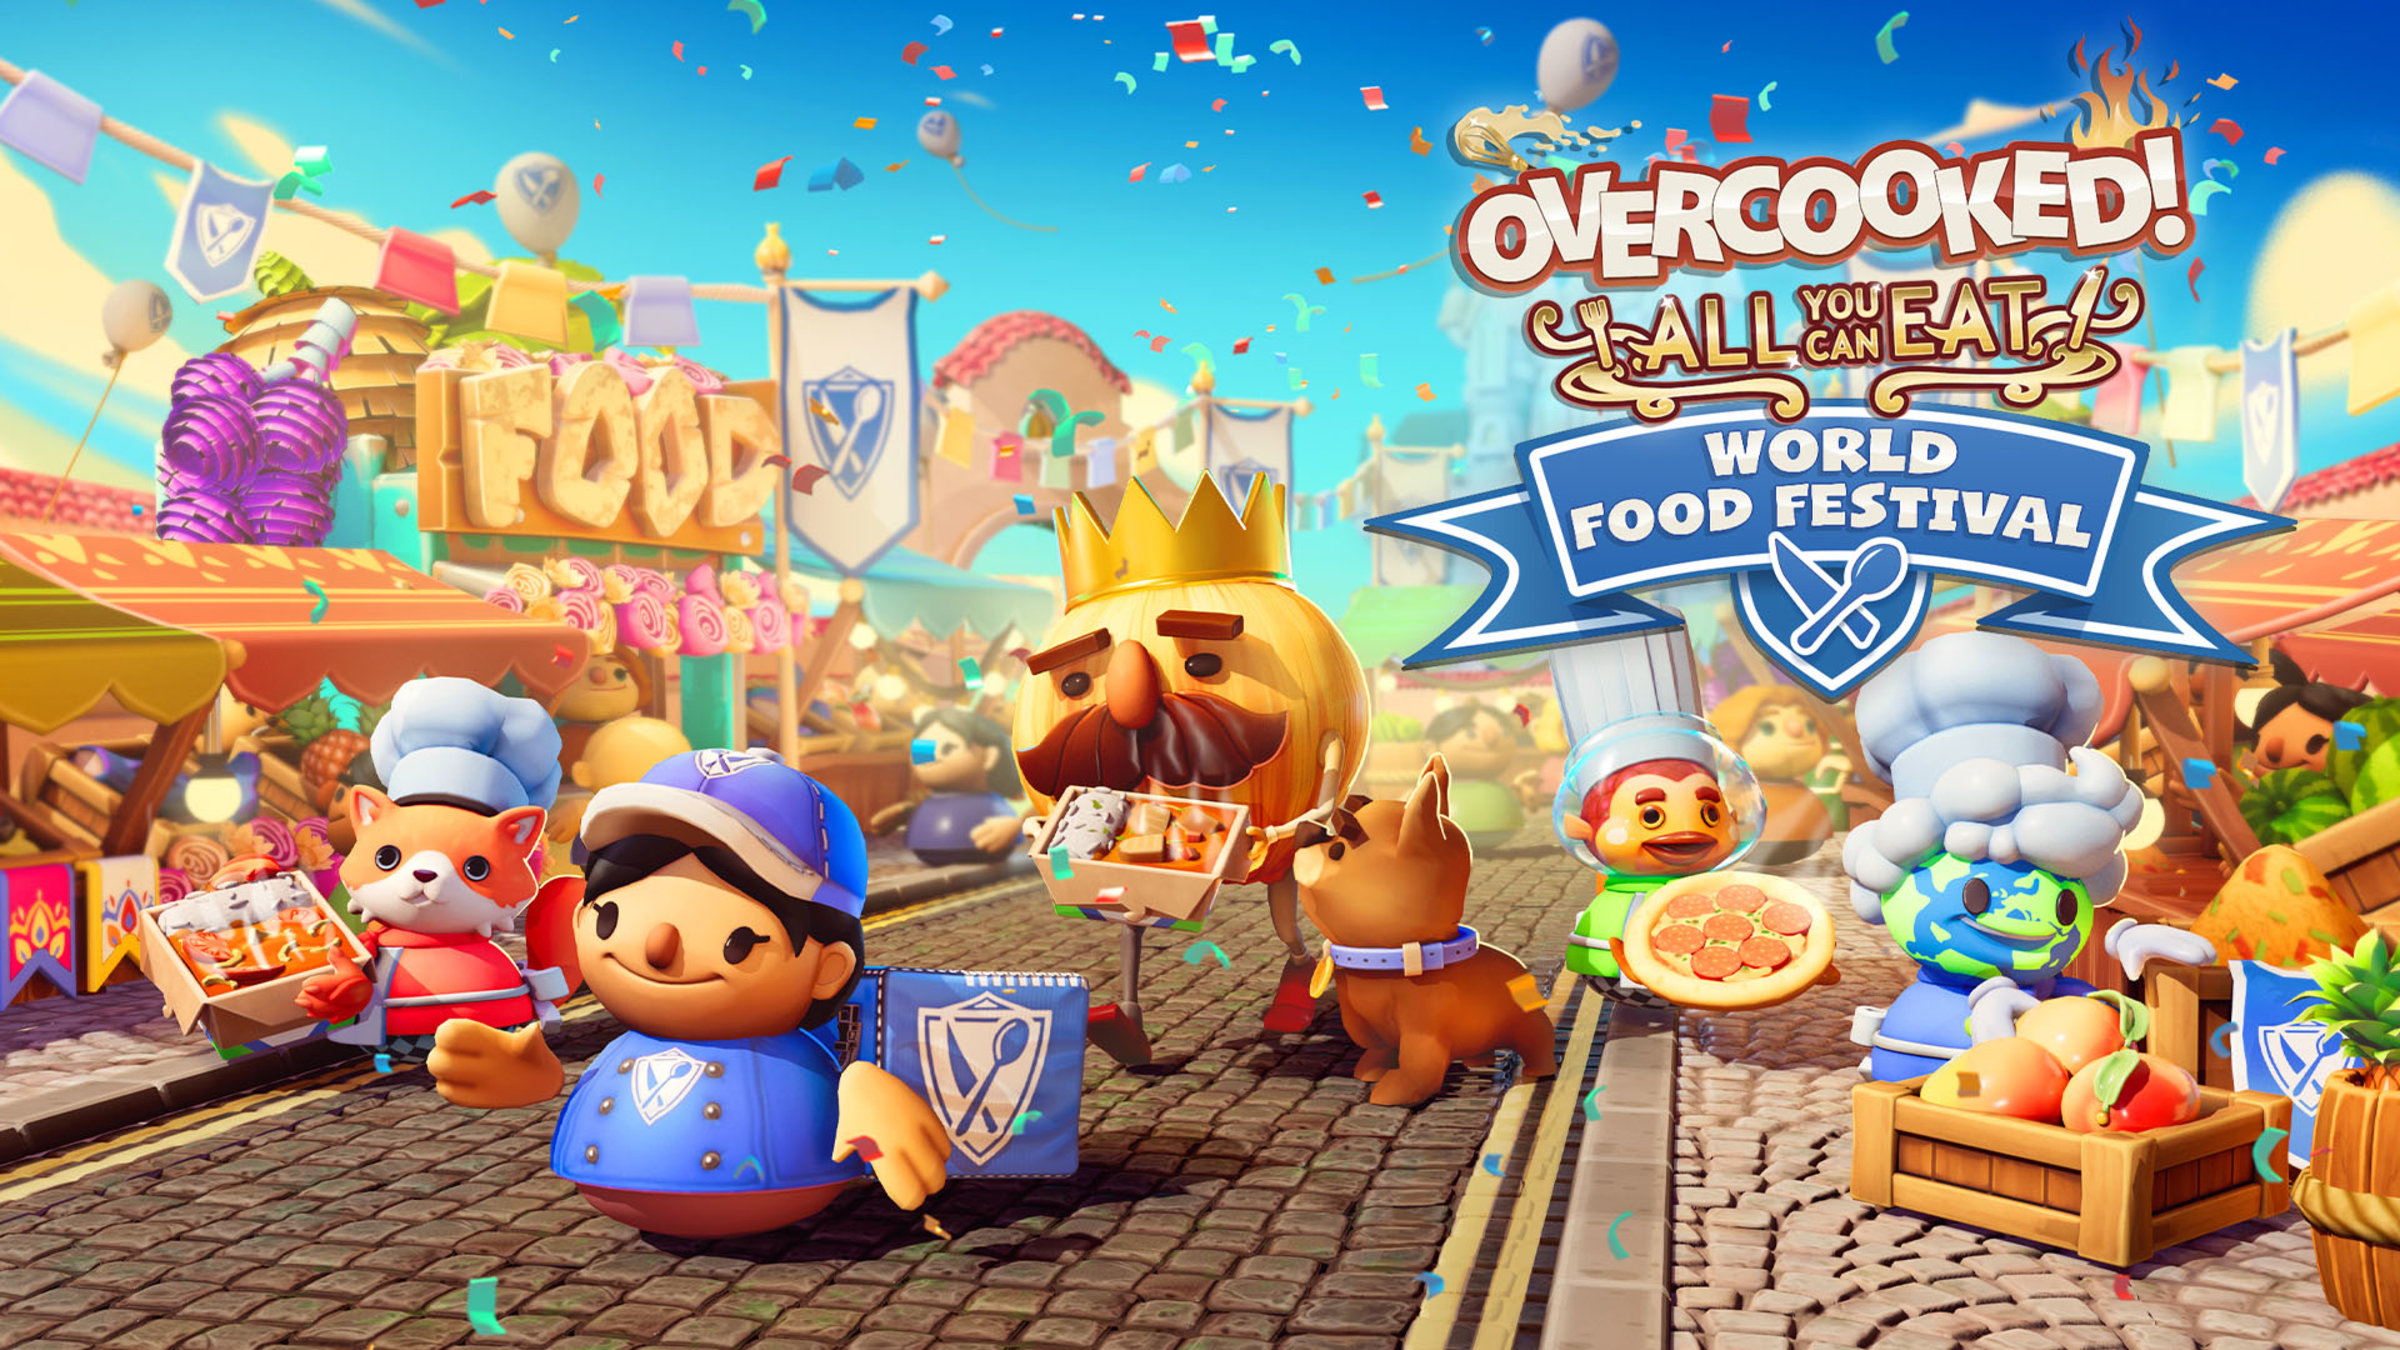 Overcooked! All You Can Eat (Nintendo Switch Digital Download) $15.99